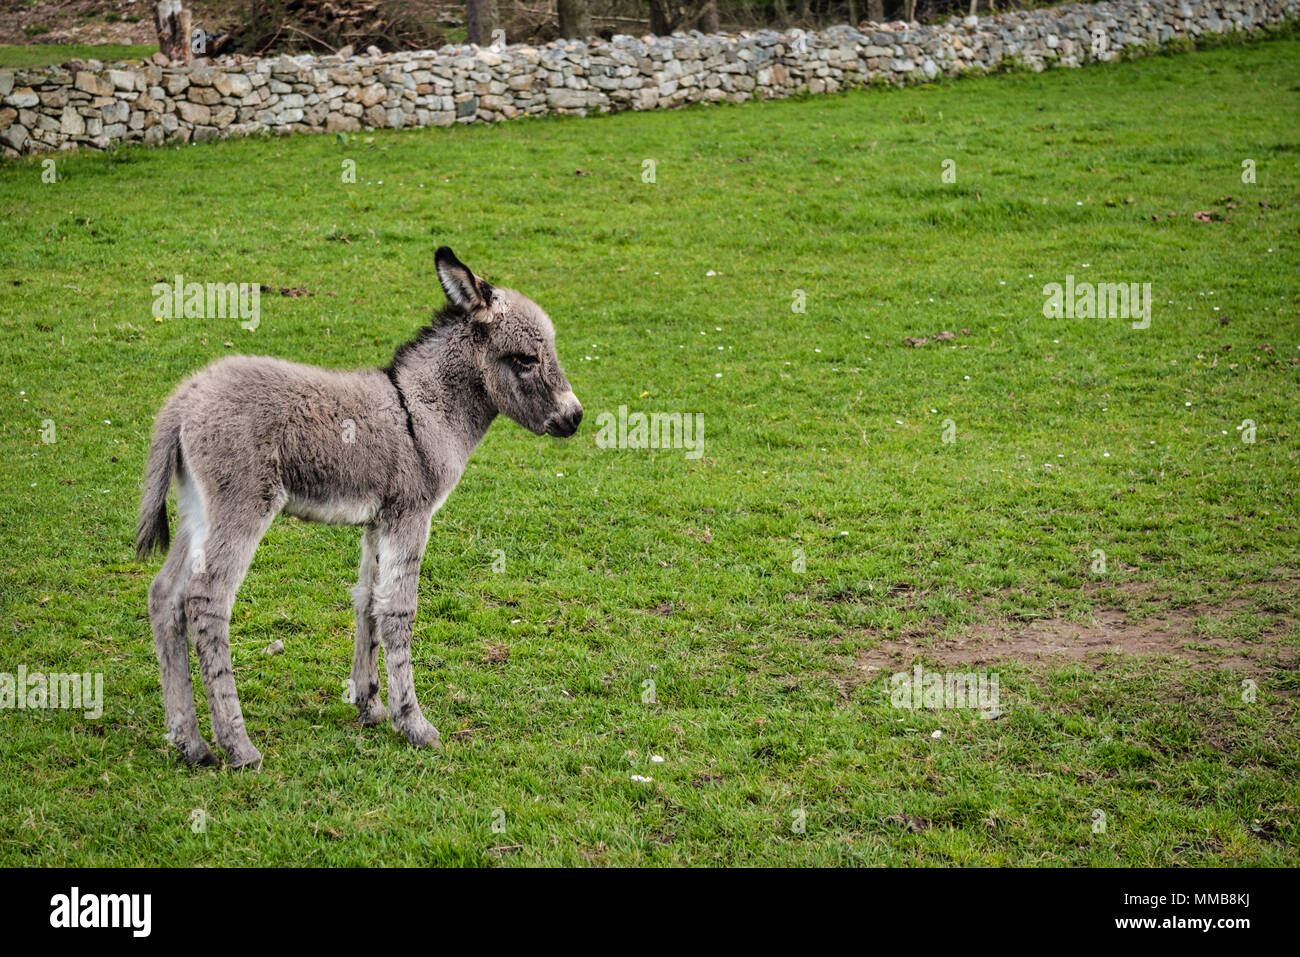 This is a newborn Donkey foal in a field in Ireland Stock Photo